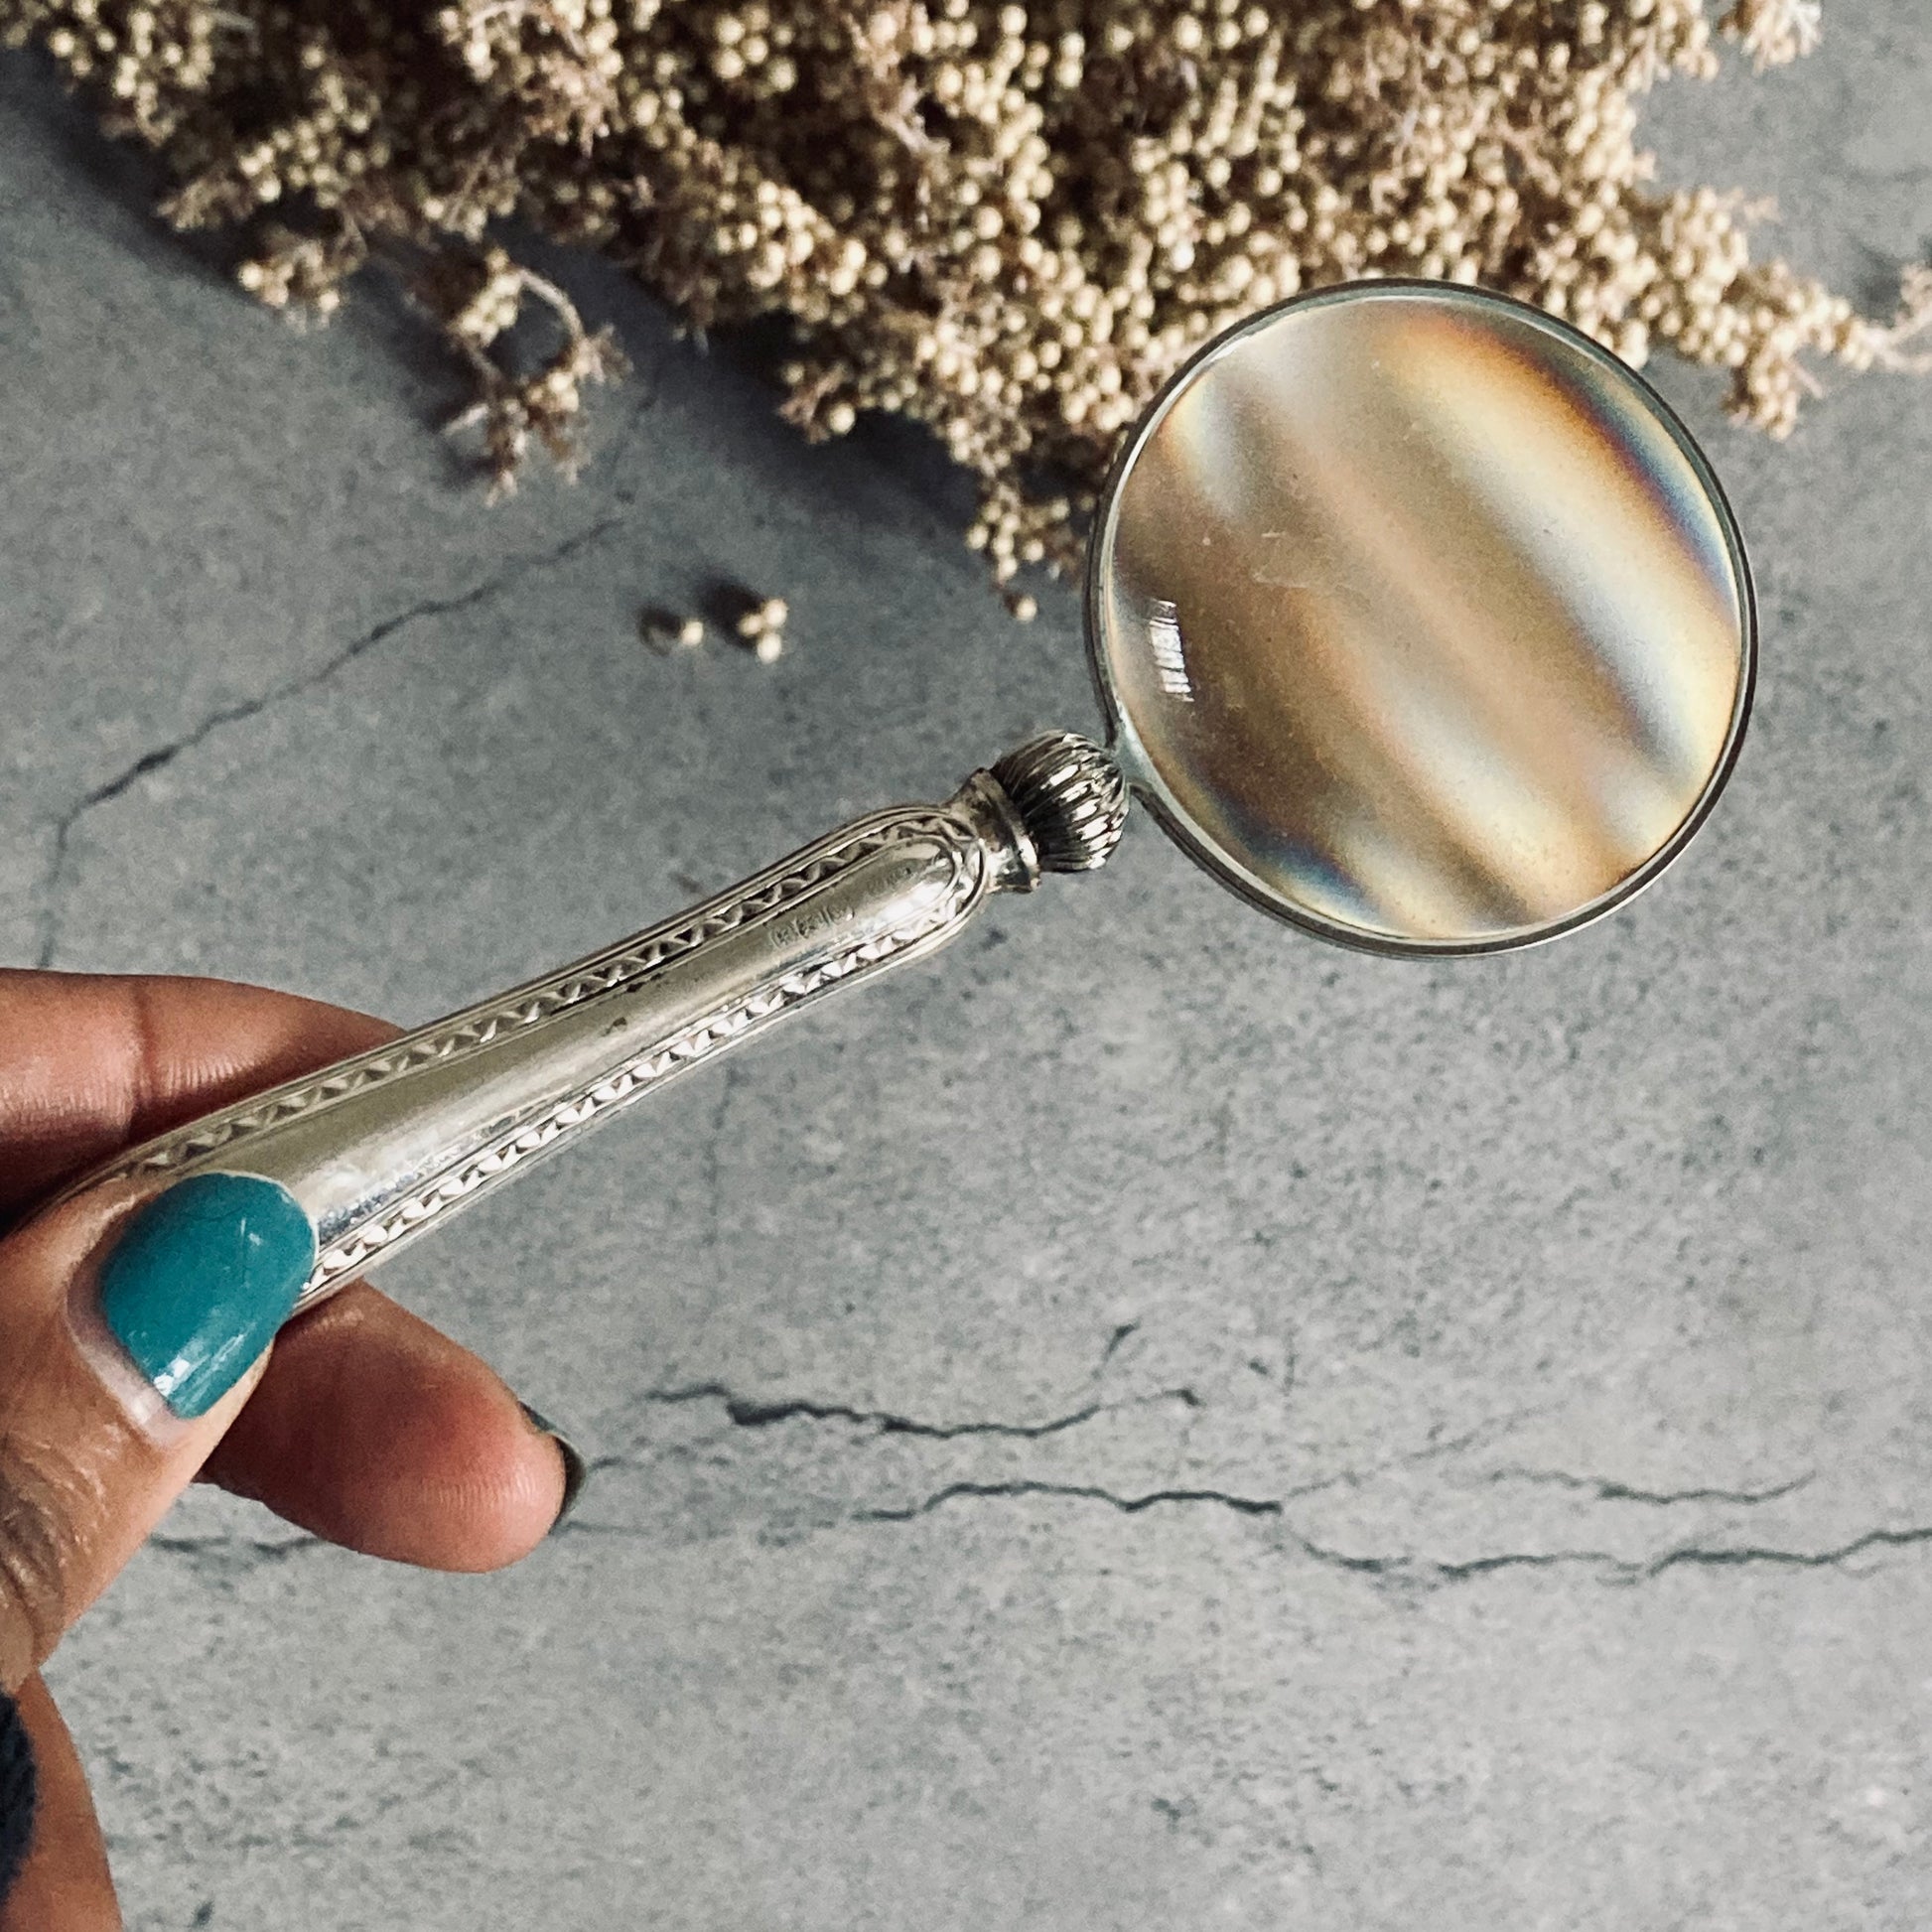 Magnifying Glass with Antique Cutlery Handles